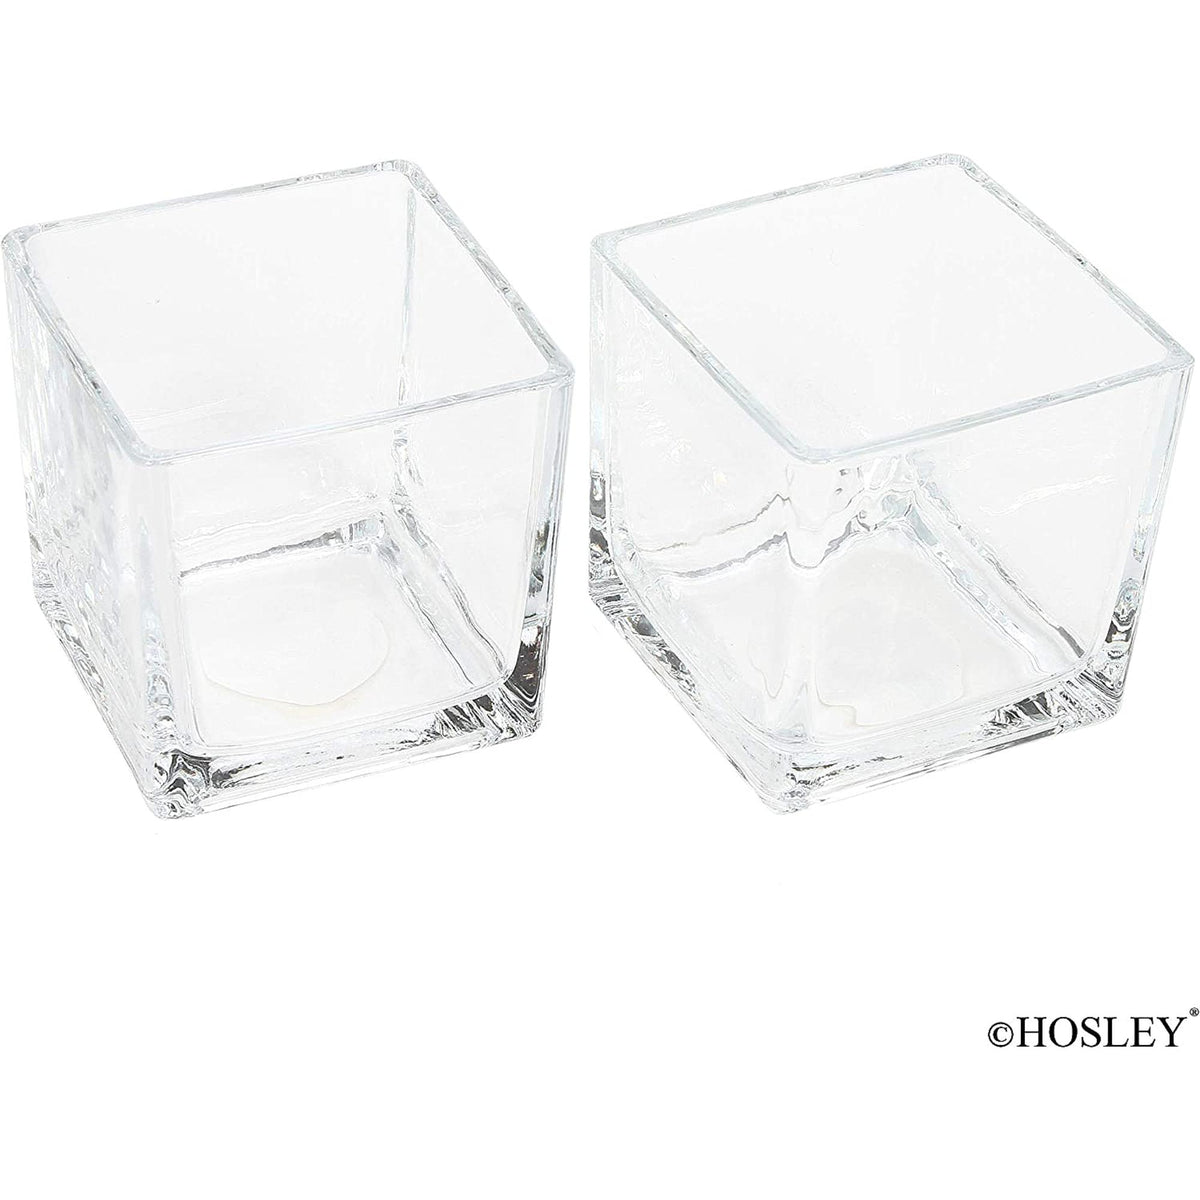 HOSLEY®  Square Vase / Candle Holder,  Clear Glass, Set of 2, 4 inches  SQ